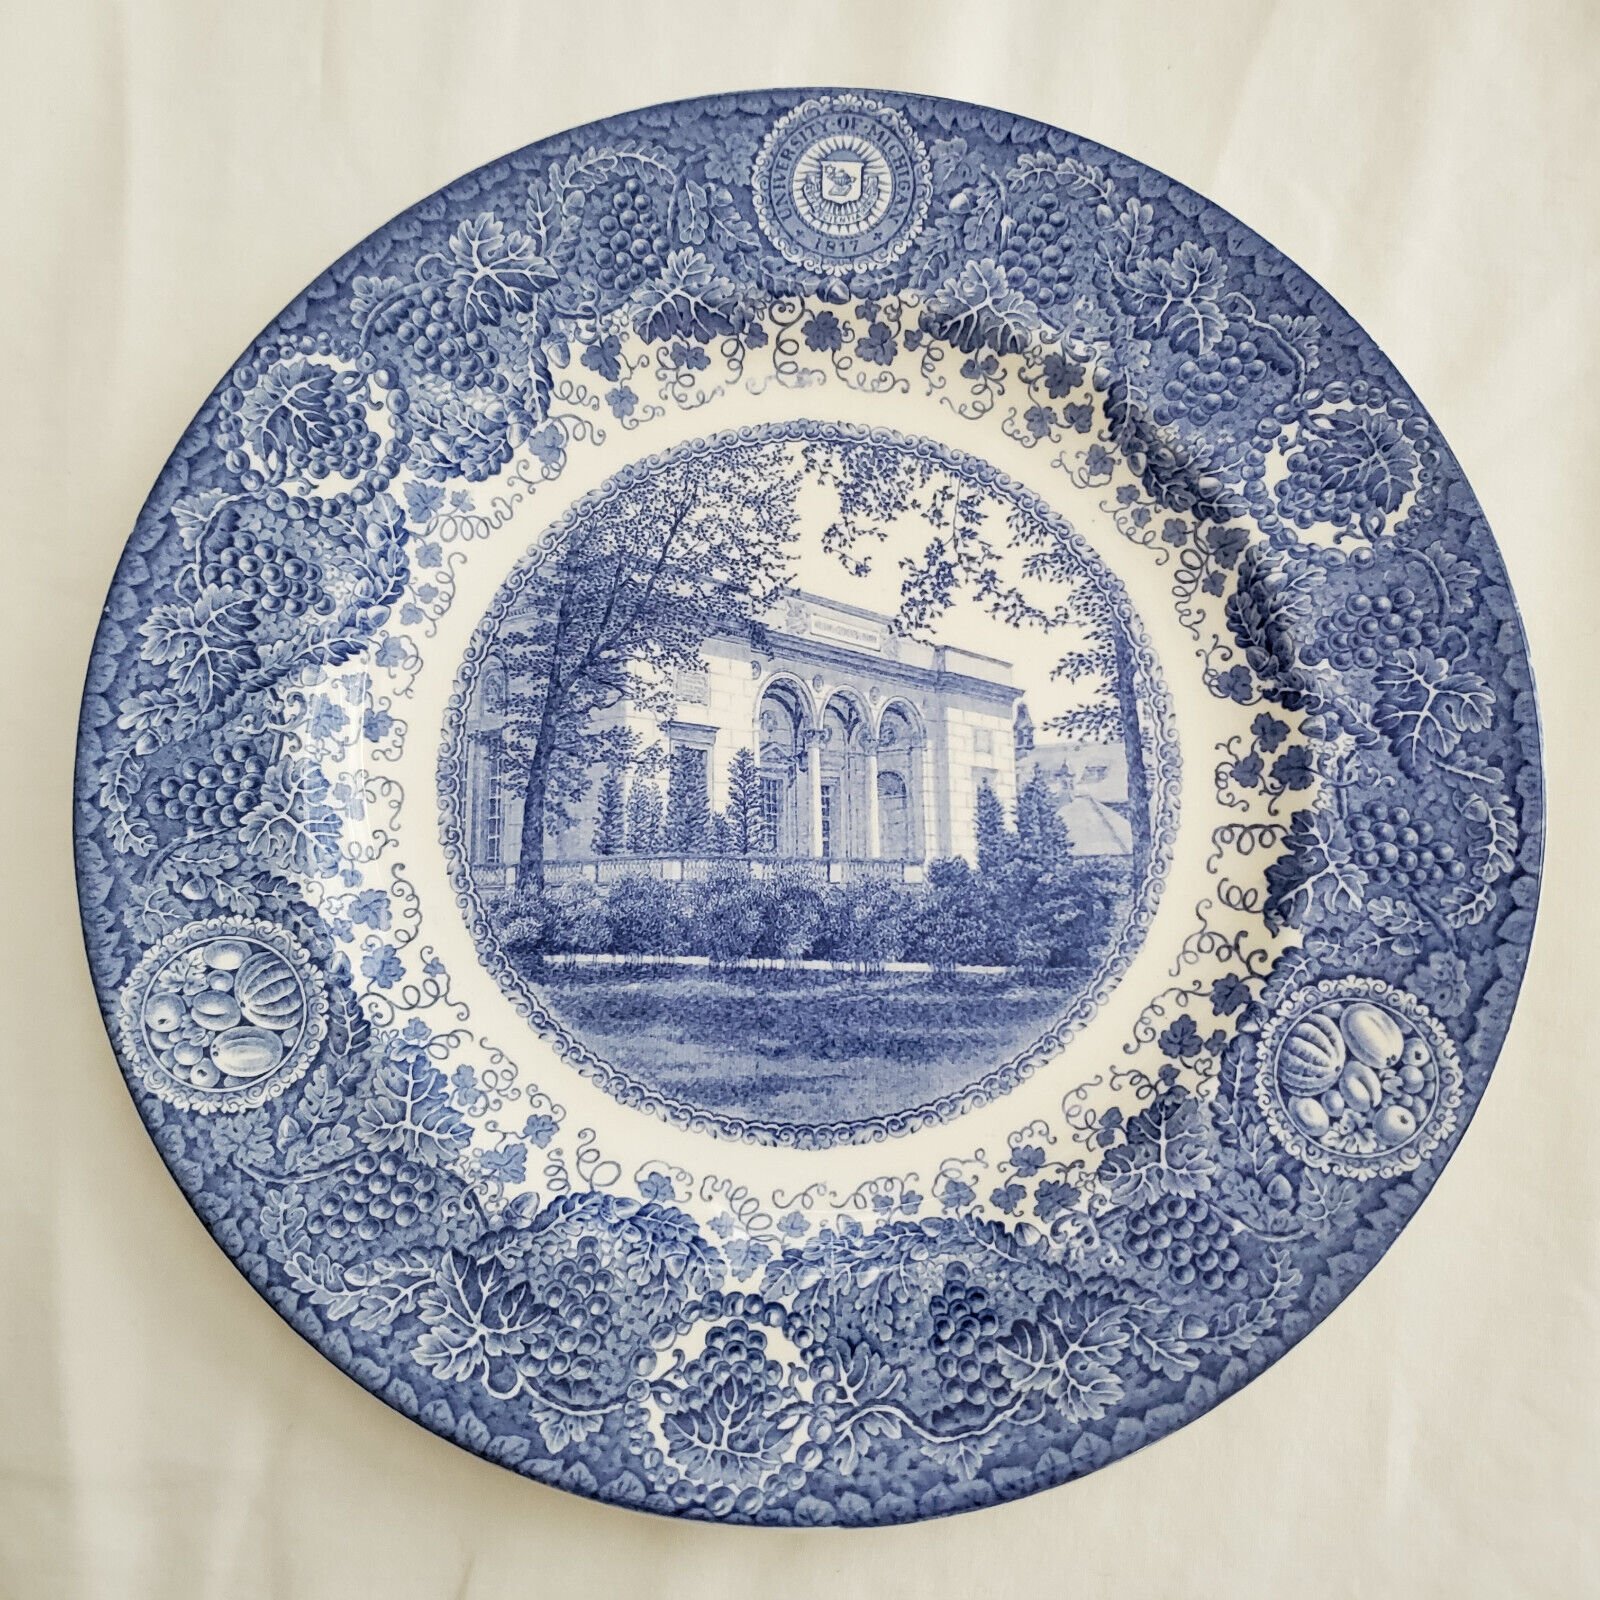 University of Michigan Rare Wedgwood 1930 Commemorative Plate - Clements Library